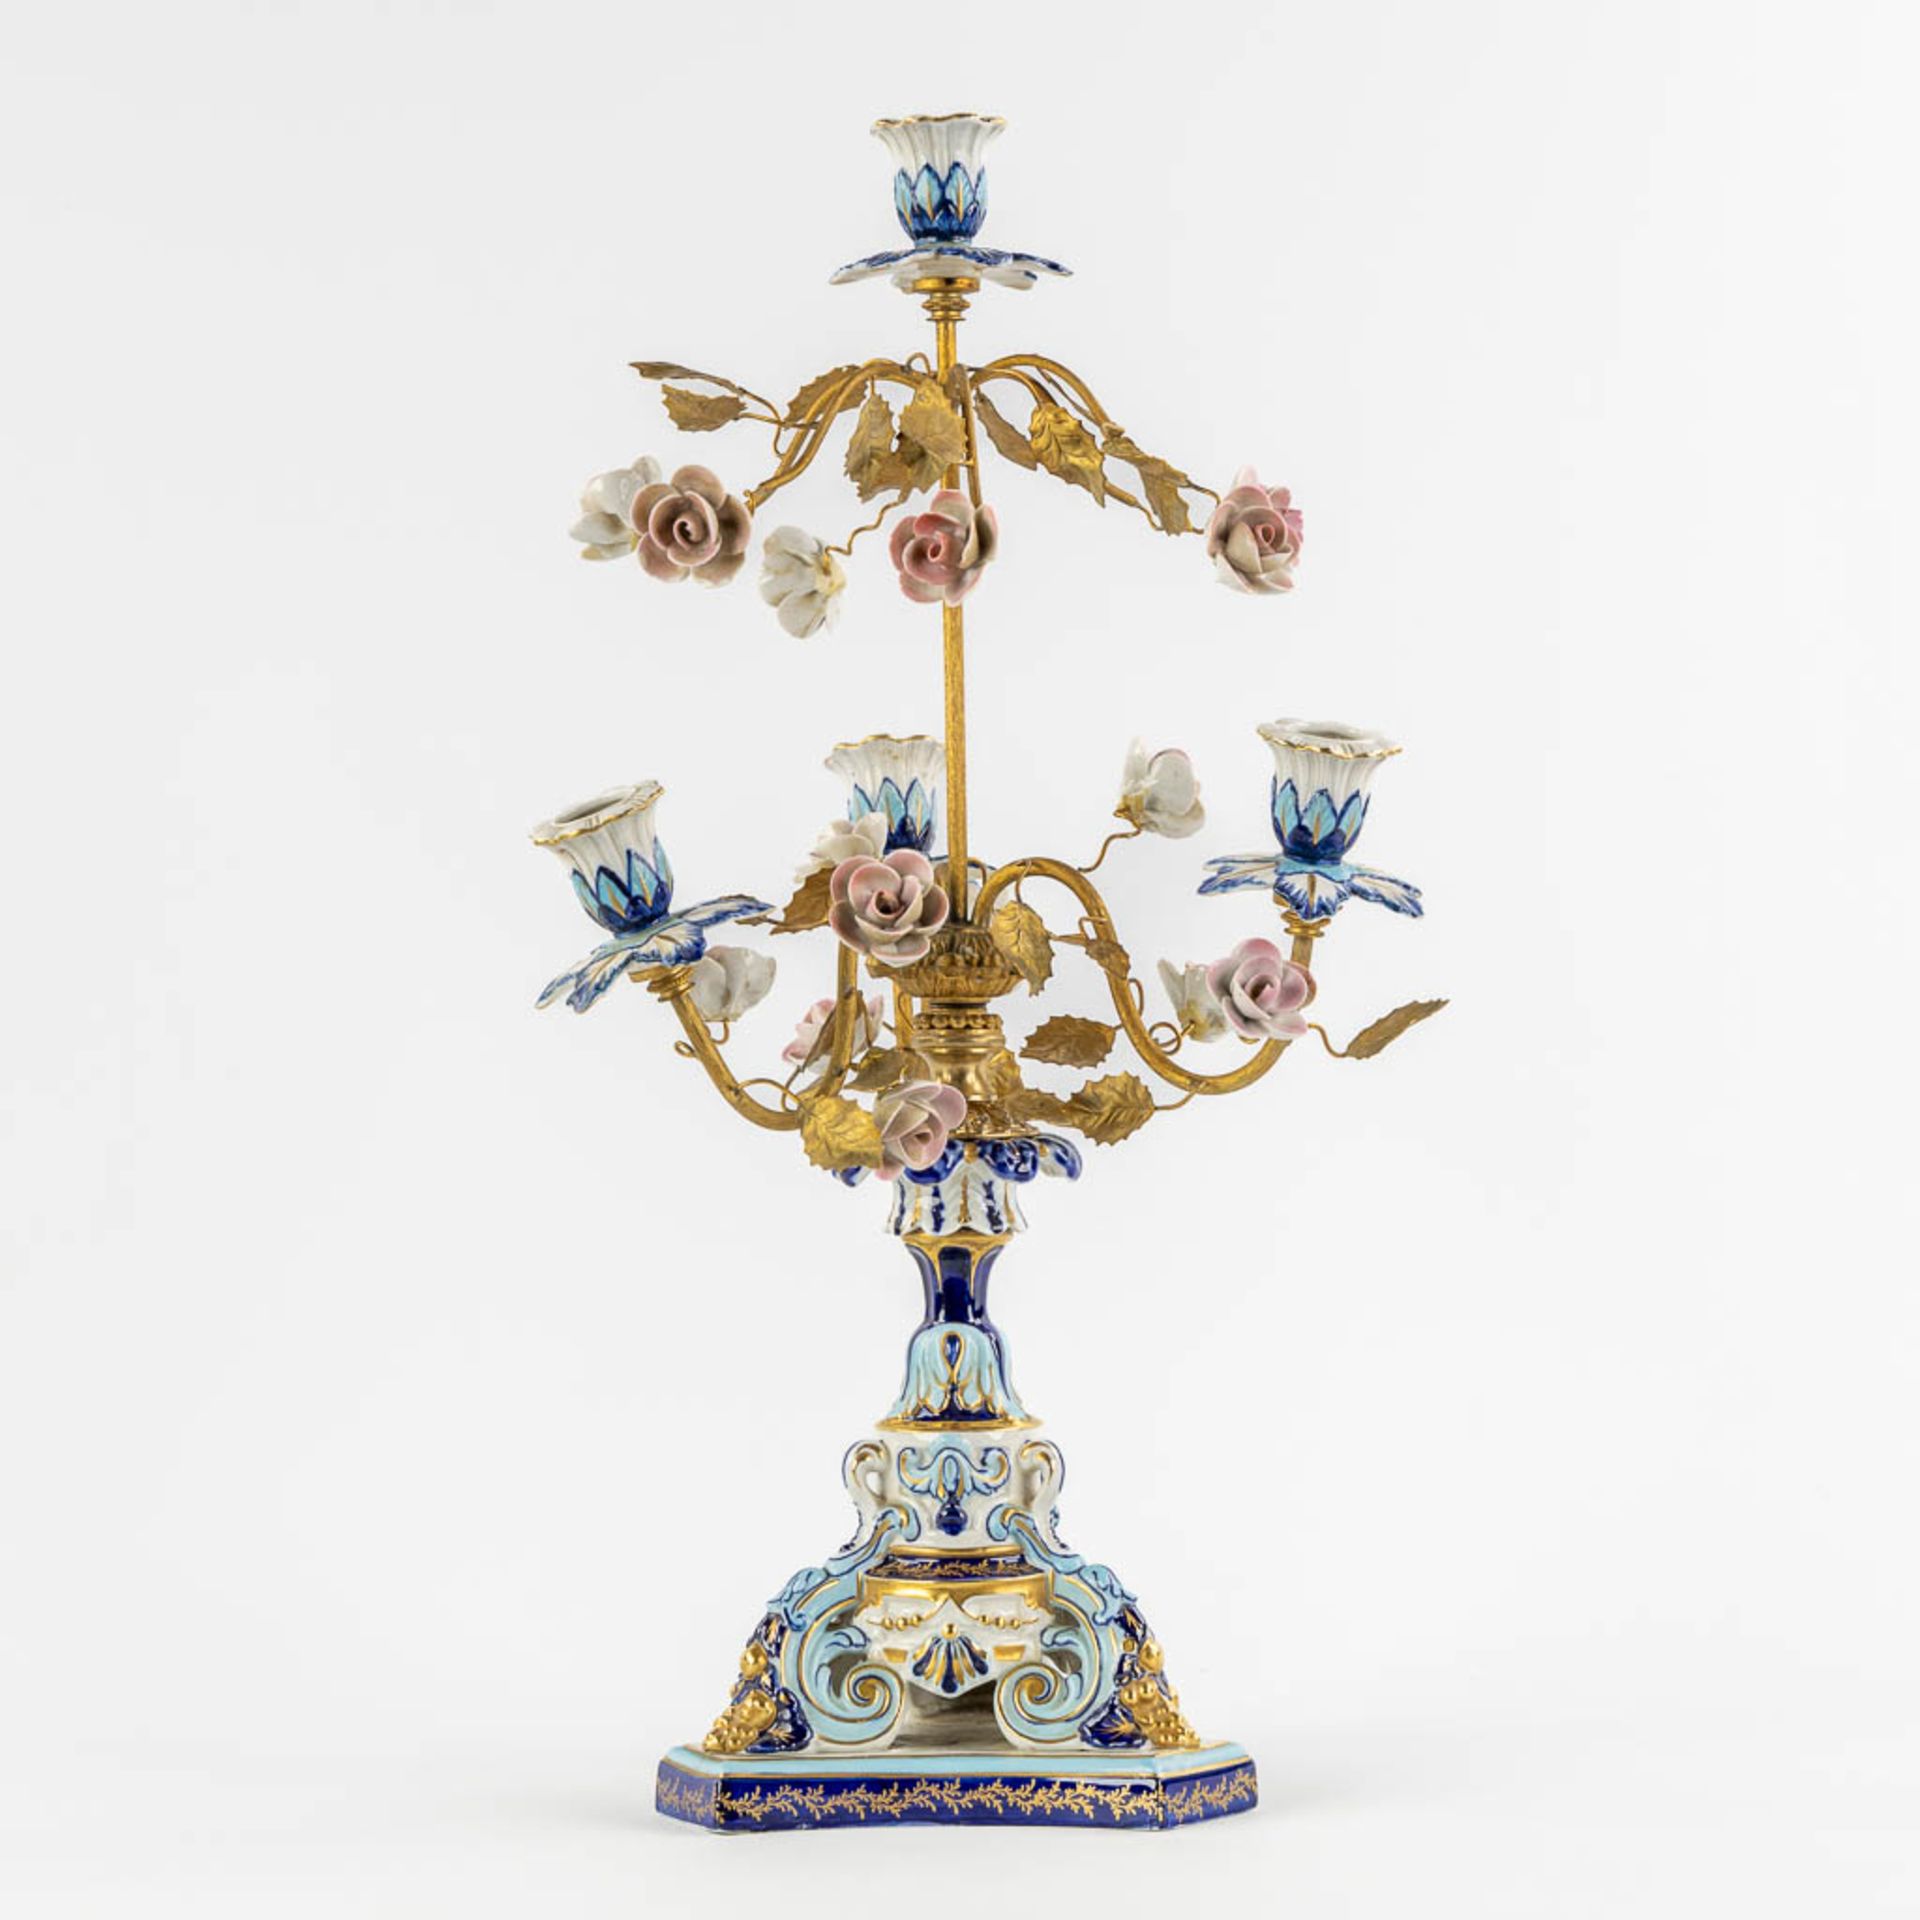 A candelabra, gilt brass and polychrome porcelain with flowers. Sèvres marks. (H:51 x D:24 cm) - Image 5 of 10